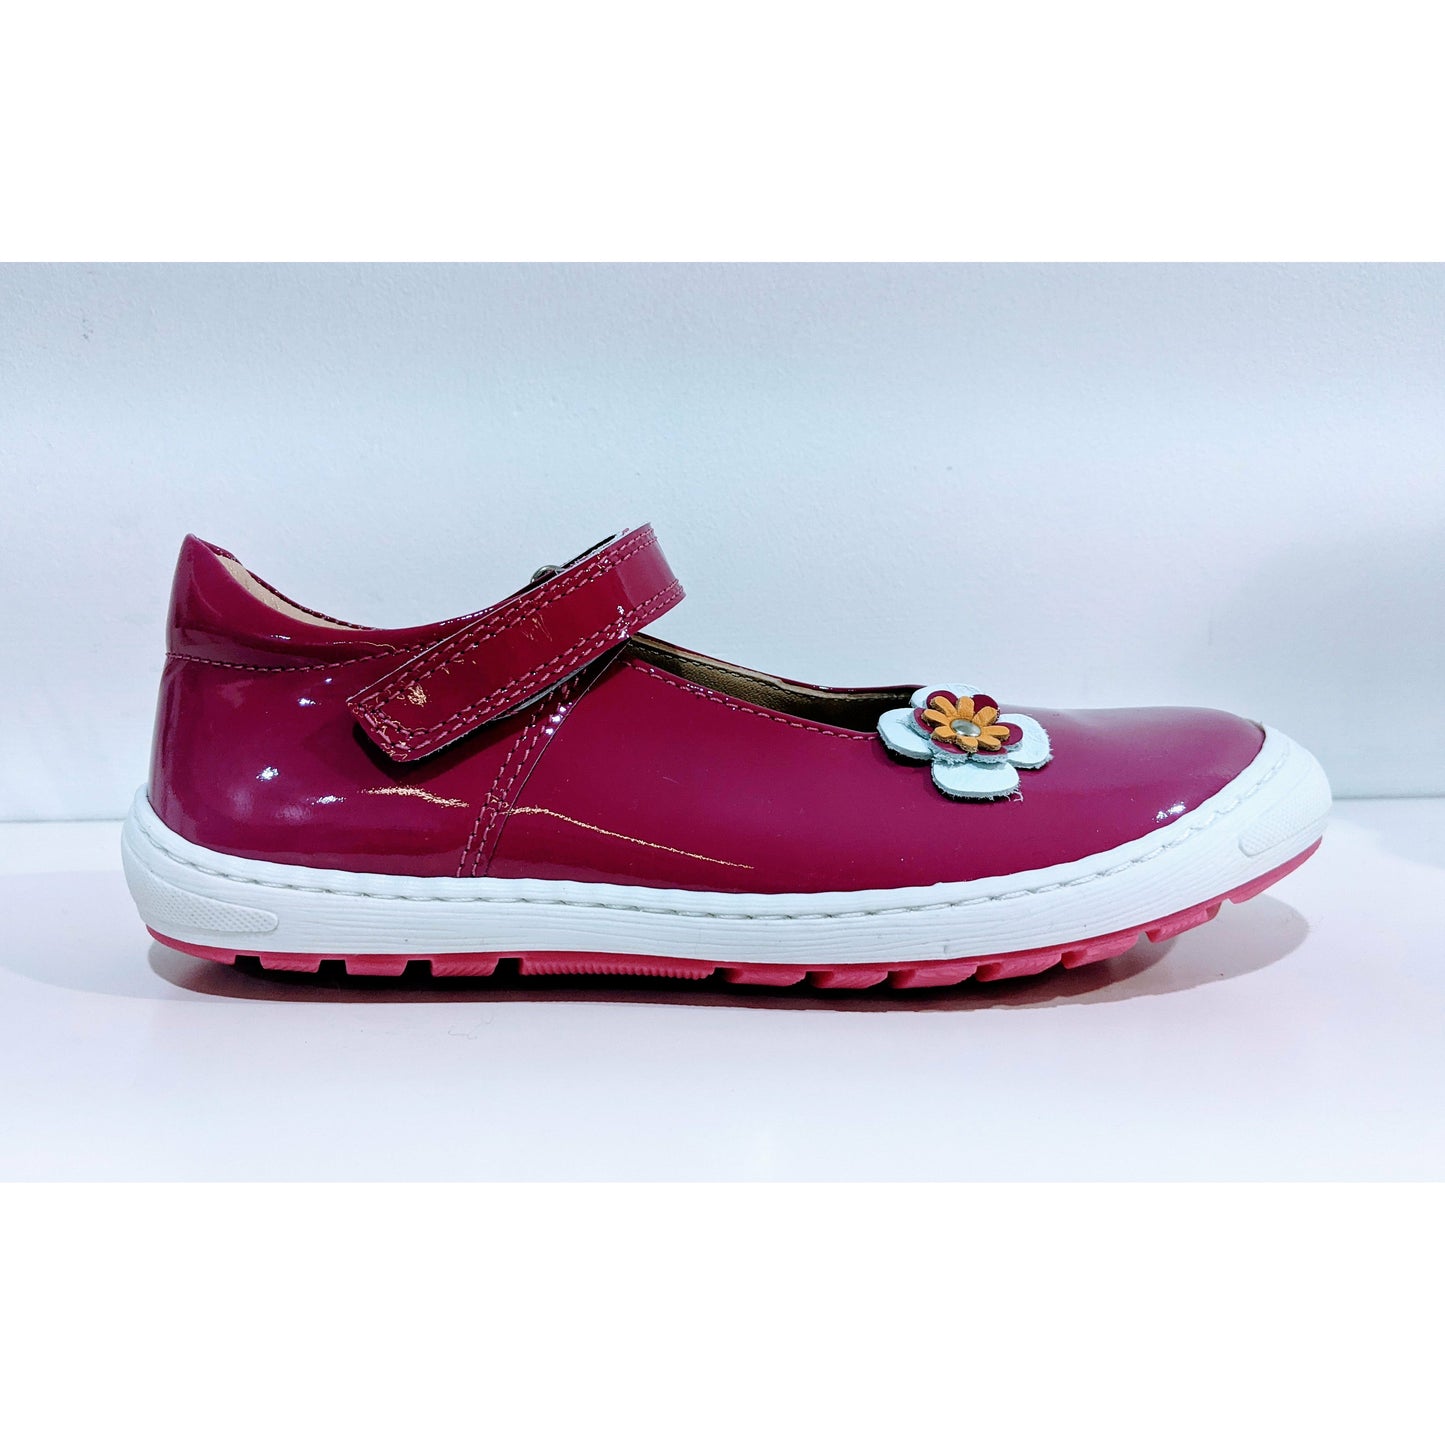 A girls Mary Jane shoe by Petasil,style Cathy, in pink patent with velcro fastening. Right side view.